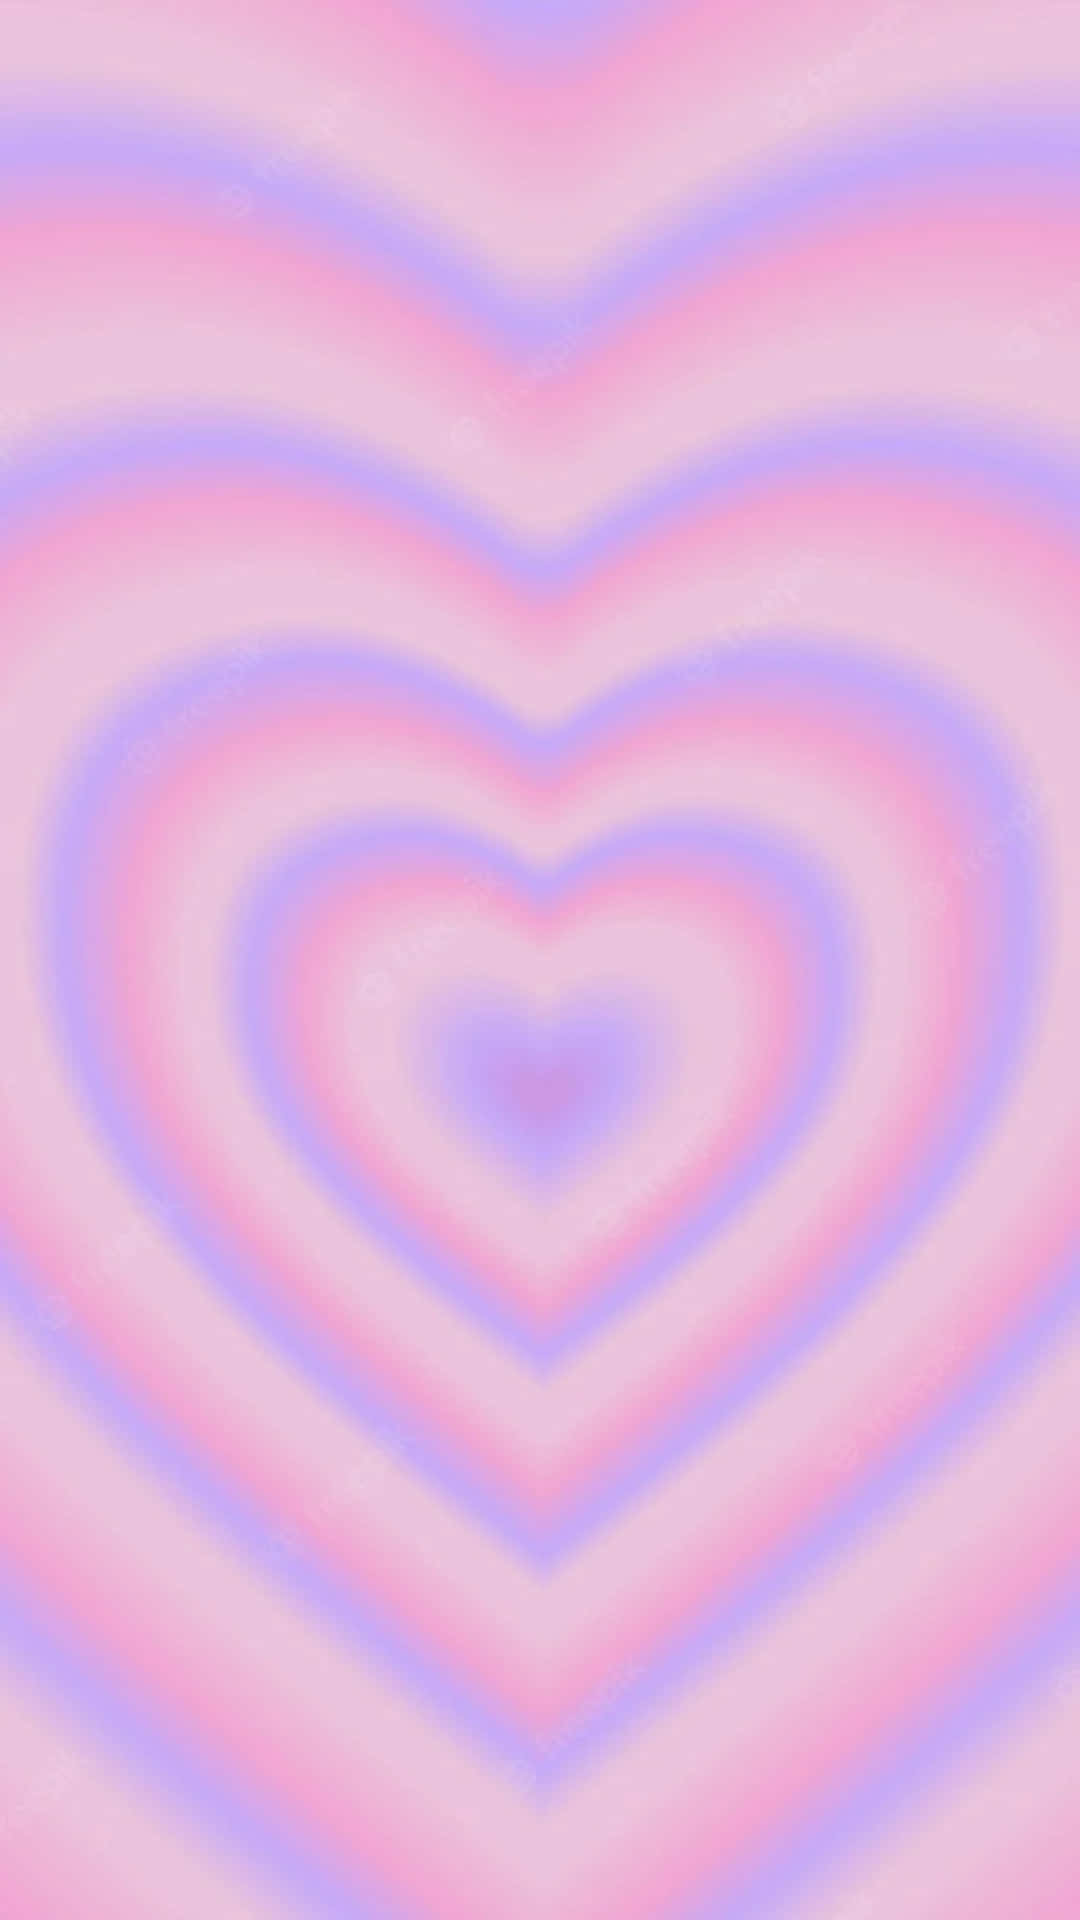 A Pink And Purple Heart Shaped Background